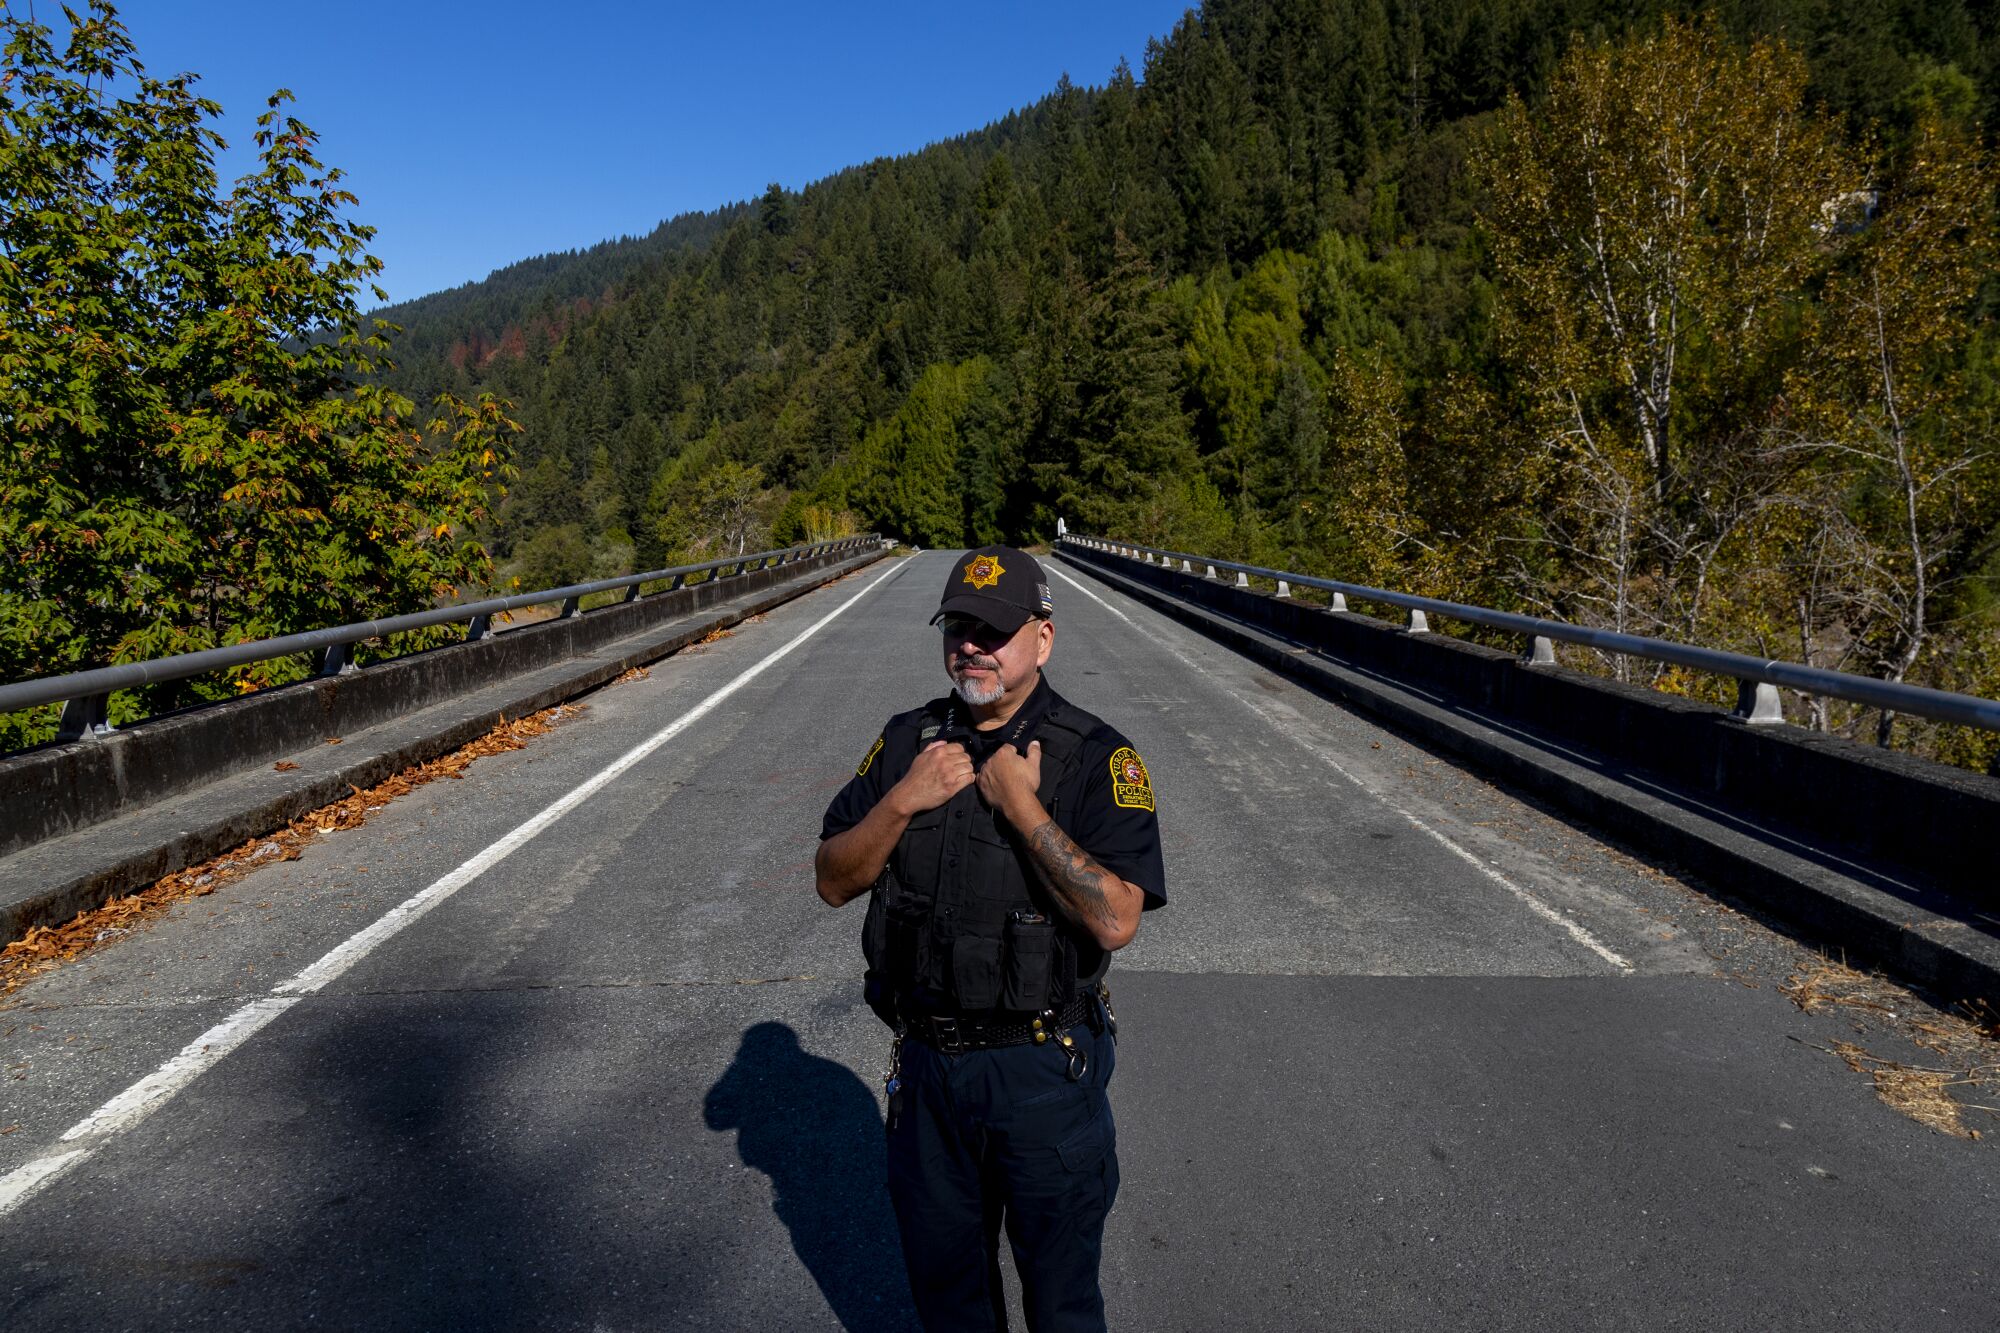 The police chief of the Yurok tribe, Greg O'Rourke, stands on a road bridge mostly surrounded by a pine forest